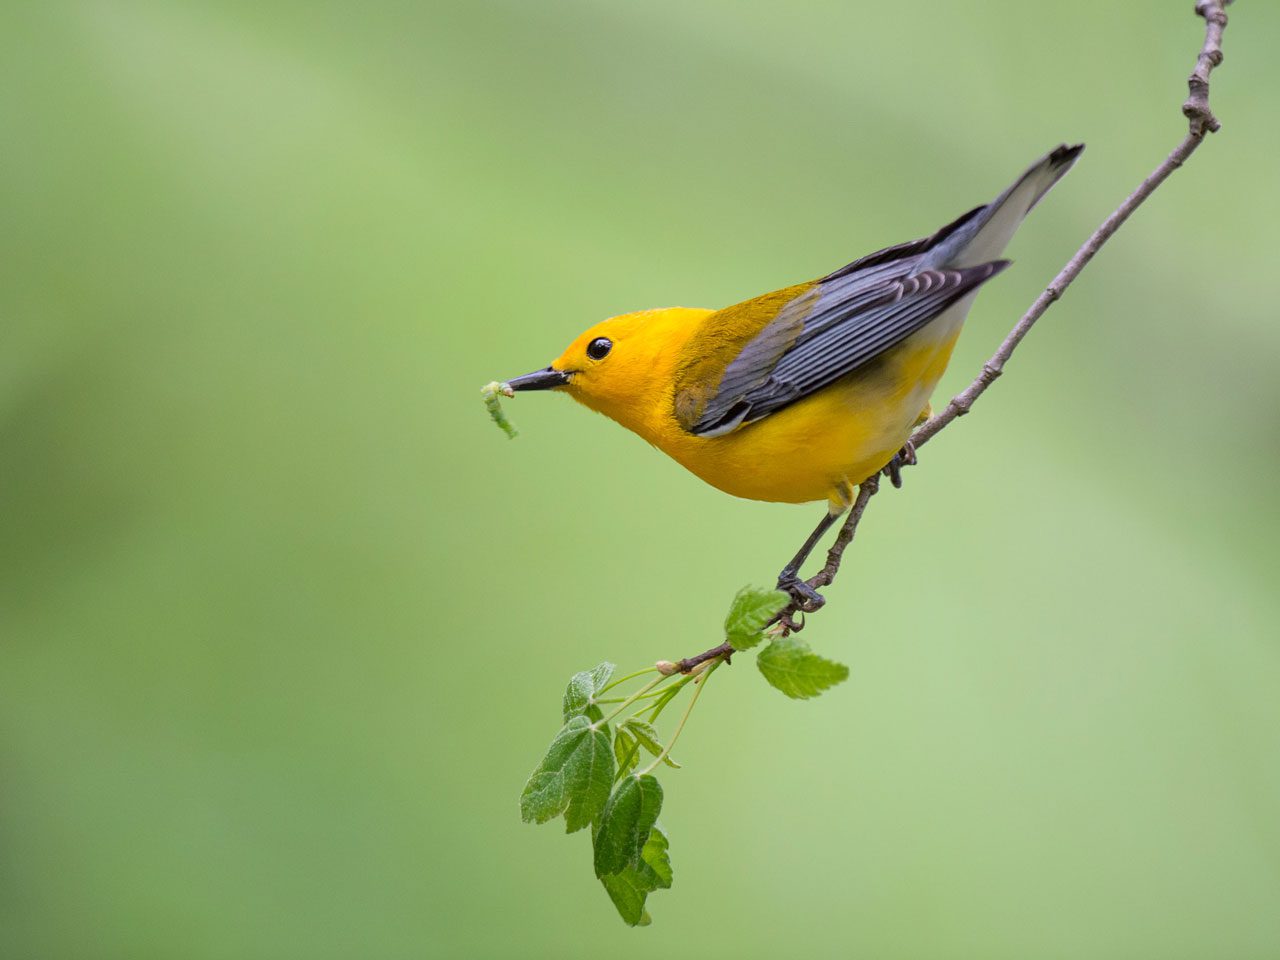 Prothonotary Warbler perched at the edge of a twig with a small worm in its beak